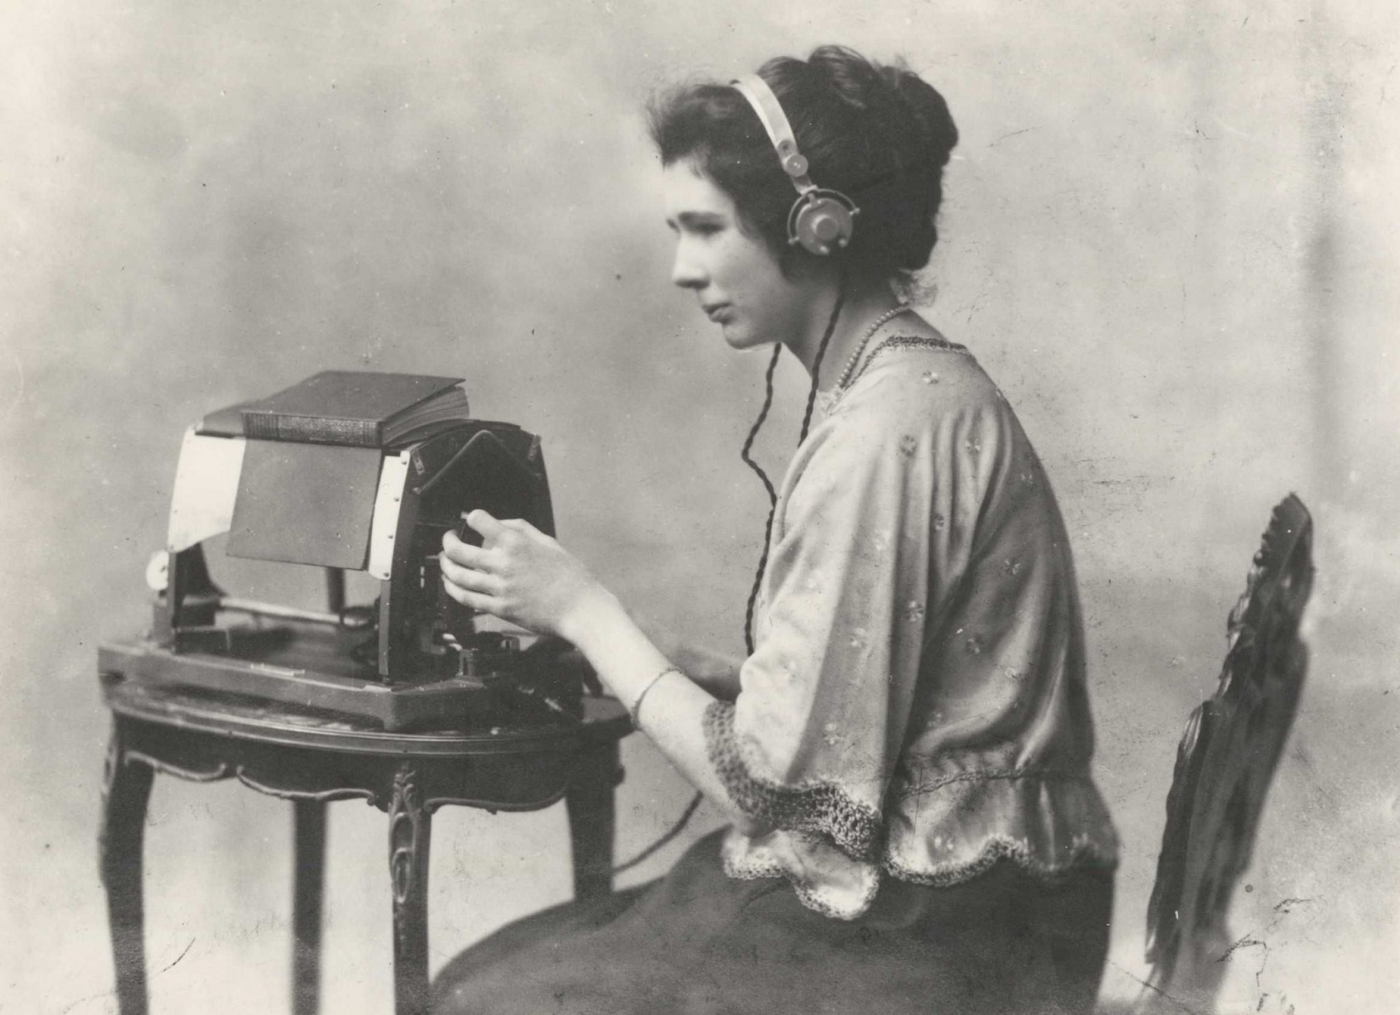 Mary Jameson was the first visually impaired person to ever read a full book thanks to the Optophone and OCR